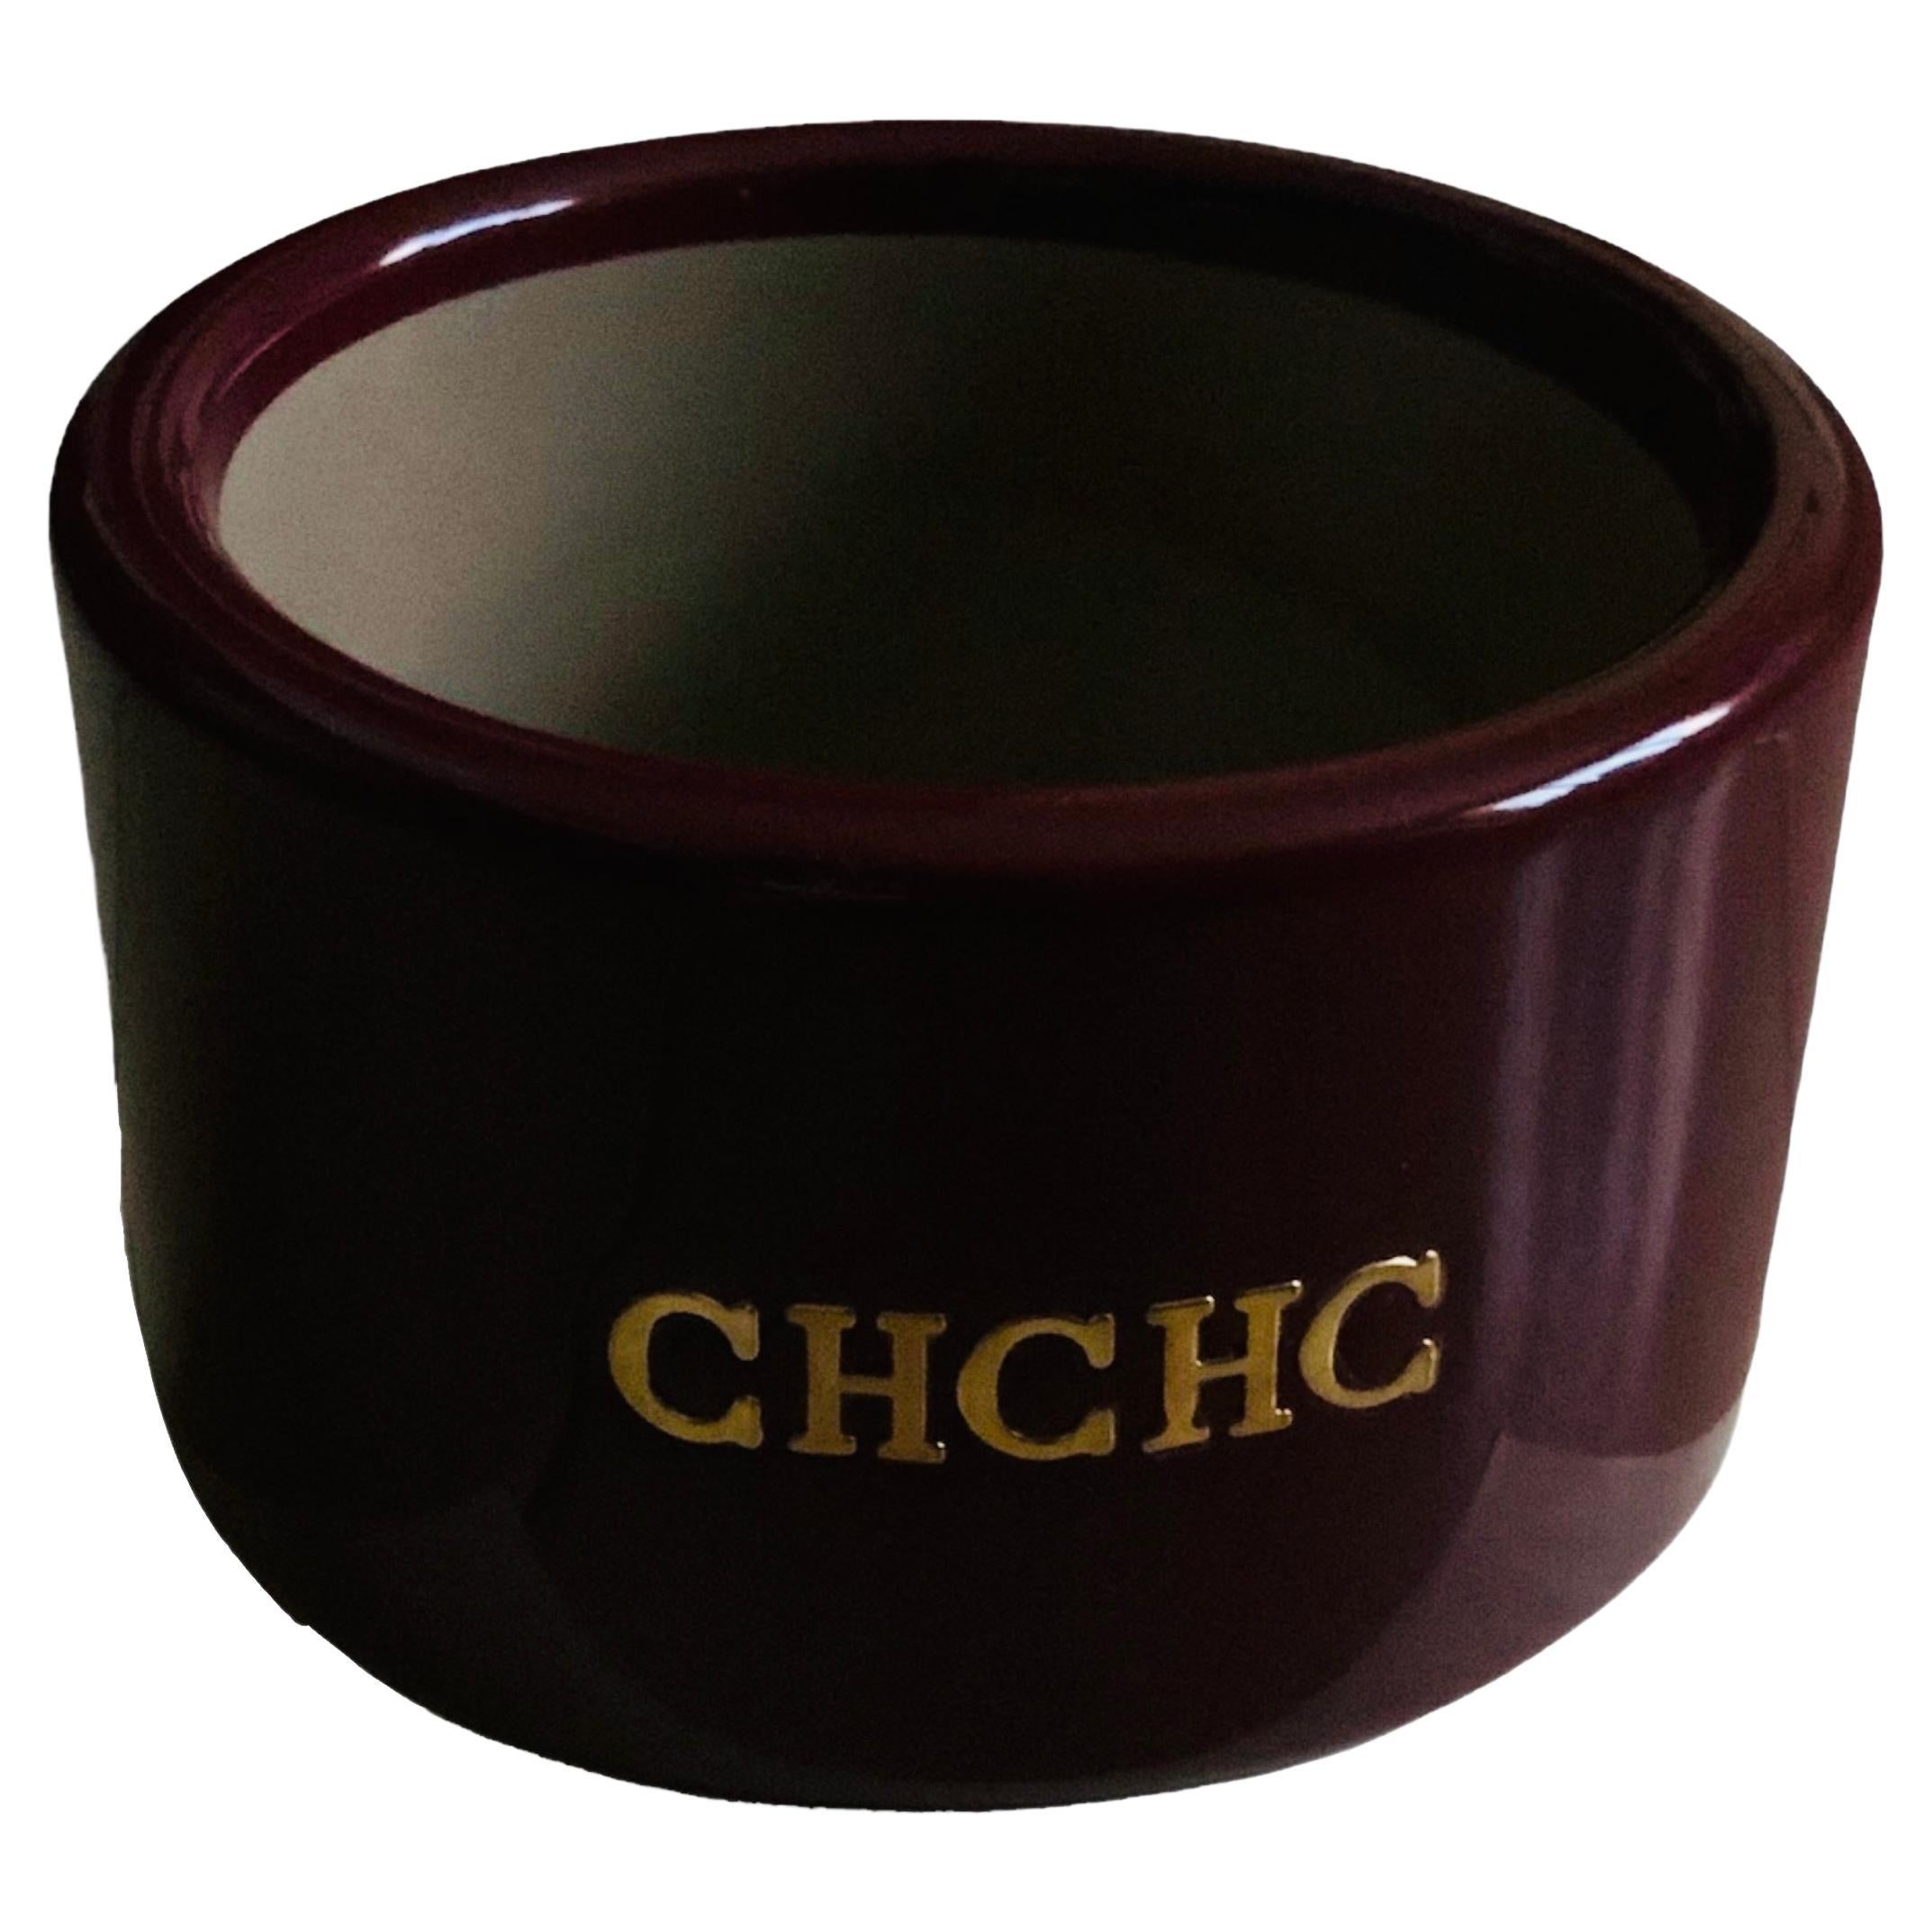 This is a Carolina Herrera cranberry color wide bangle. It is adorned in the center with gilt metal upper case initials- CHCHC from the designer name. 